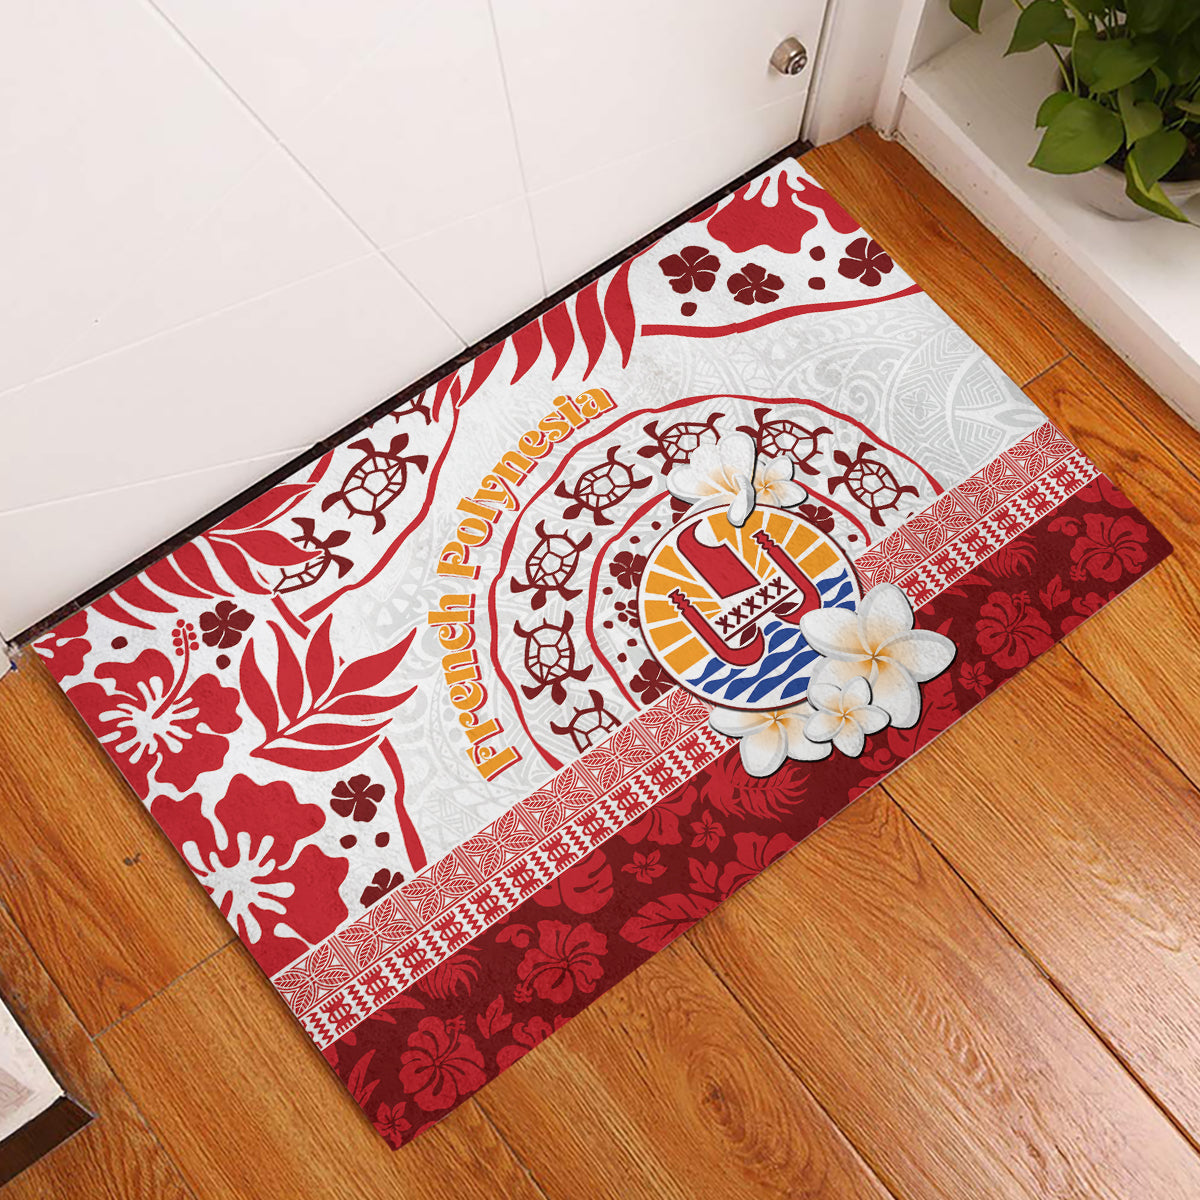 French Polynesia Internal Autonomy Day Rubber Doormat Tropical Hibiscus And Turtle Pattern